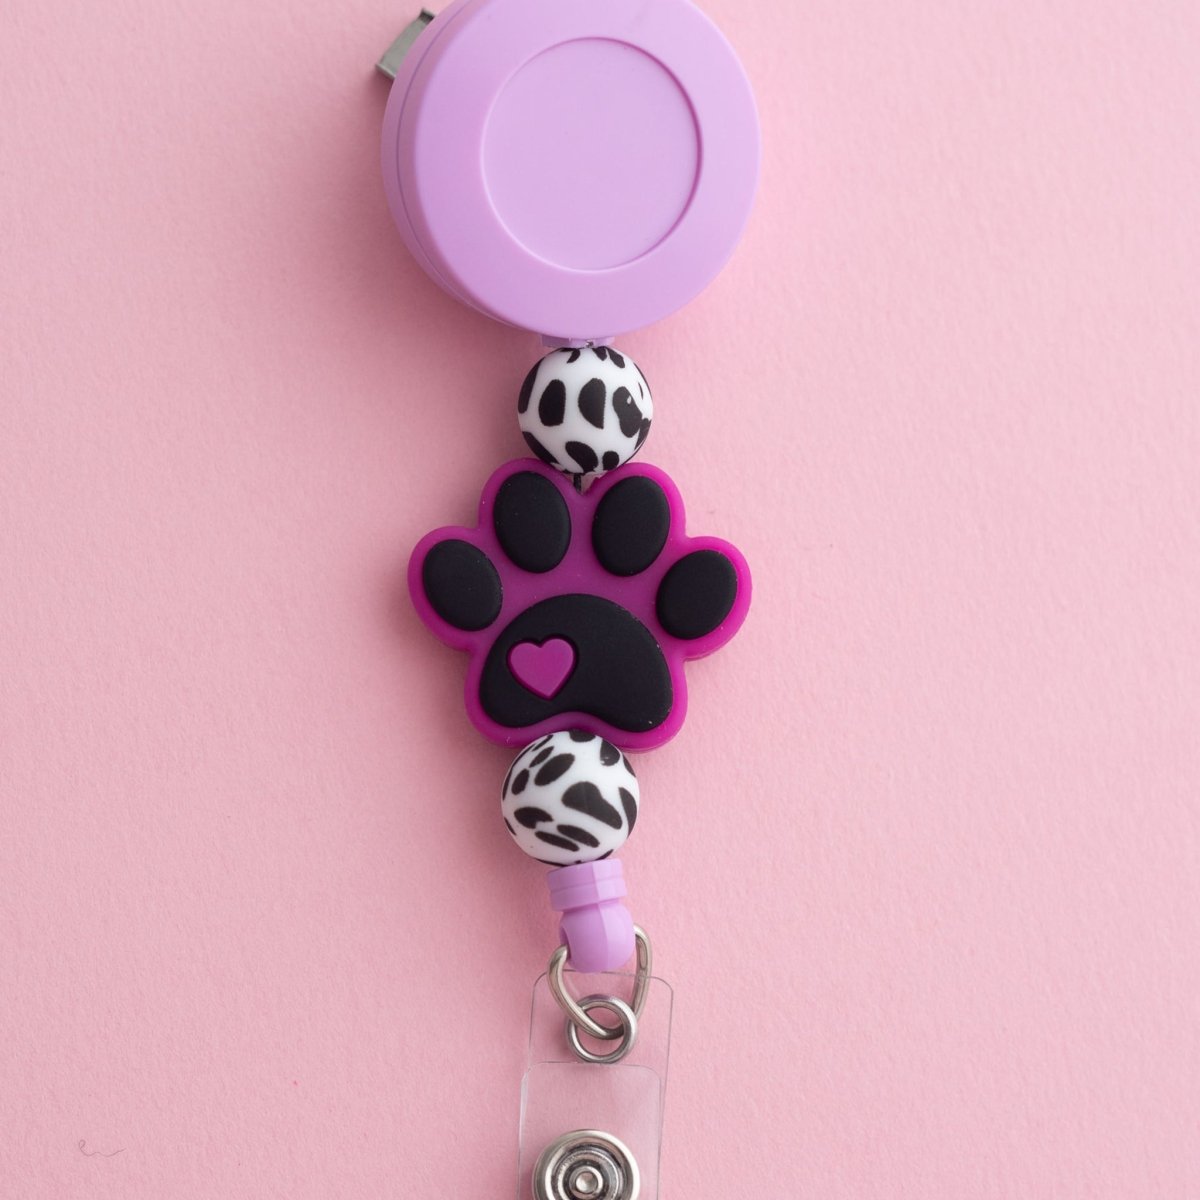 Shop the Image Spotted Paw Badge Reel from Cara & Co Craft Supply